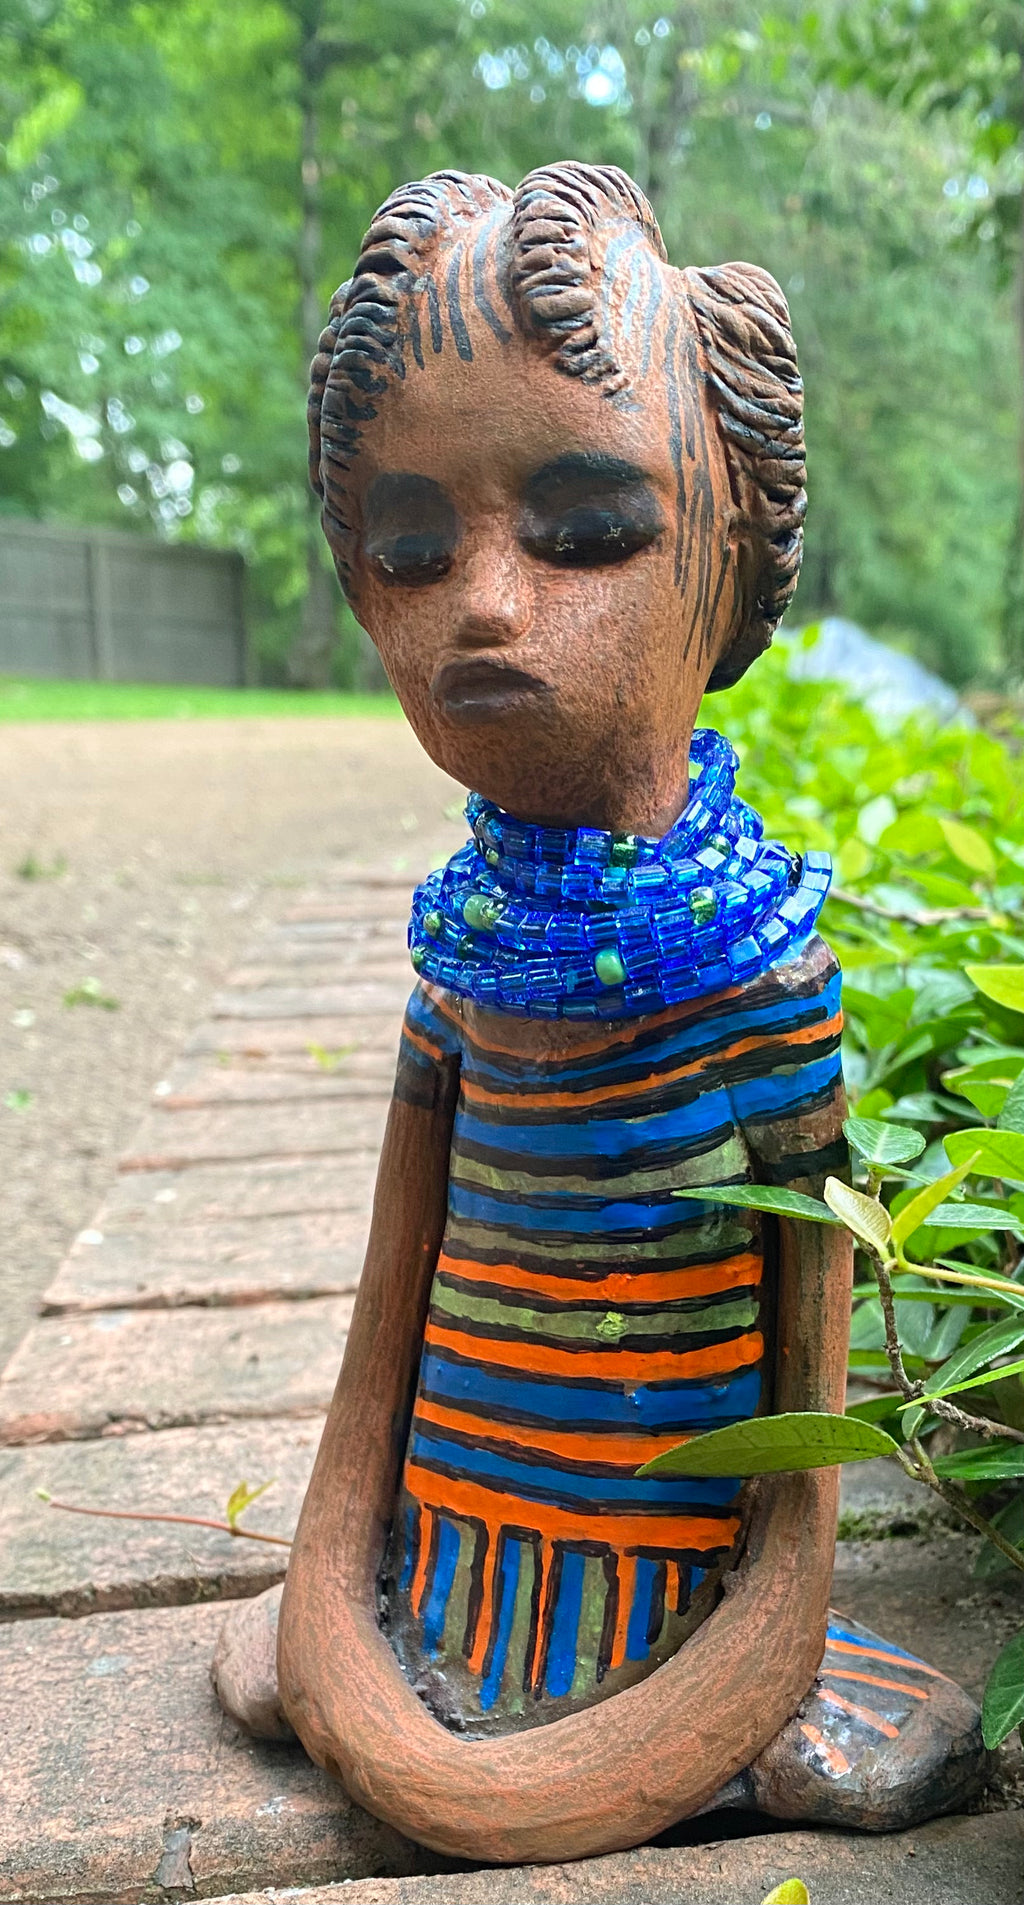 Meet Meet Harmony! Harmony stands 8' x 5"x 2" and weighs 1.7 lb. She has a nice honey brown complexion. Harmony  has stylized clay hair.  Her long trademark arms rest at her side. Harmony's dress is  colorful with  geometric flare.. She accents with a aqua blue beaded necklace. Harmony is priced right to be accepted into  your home! 